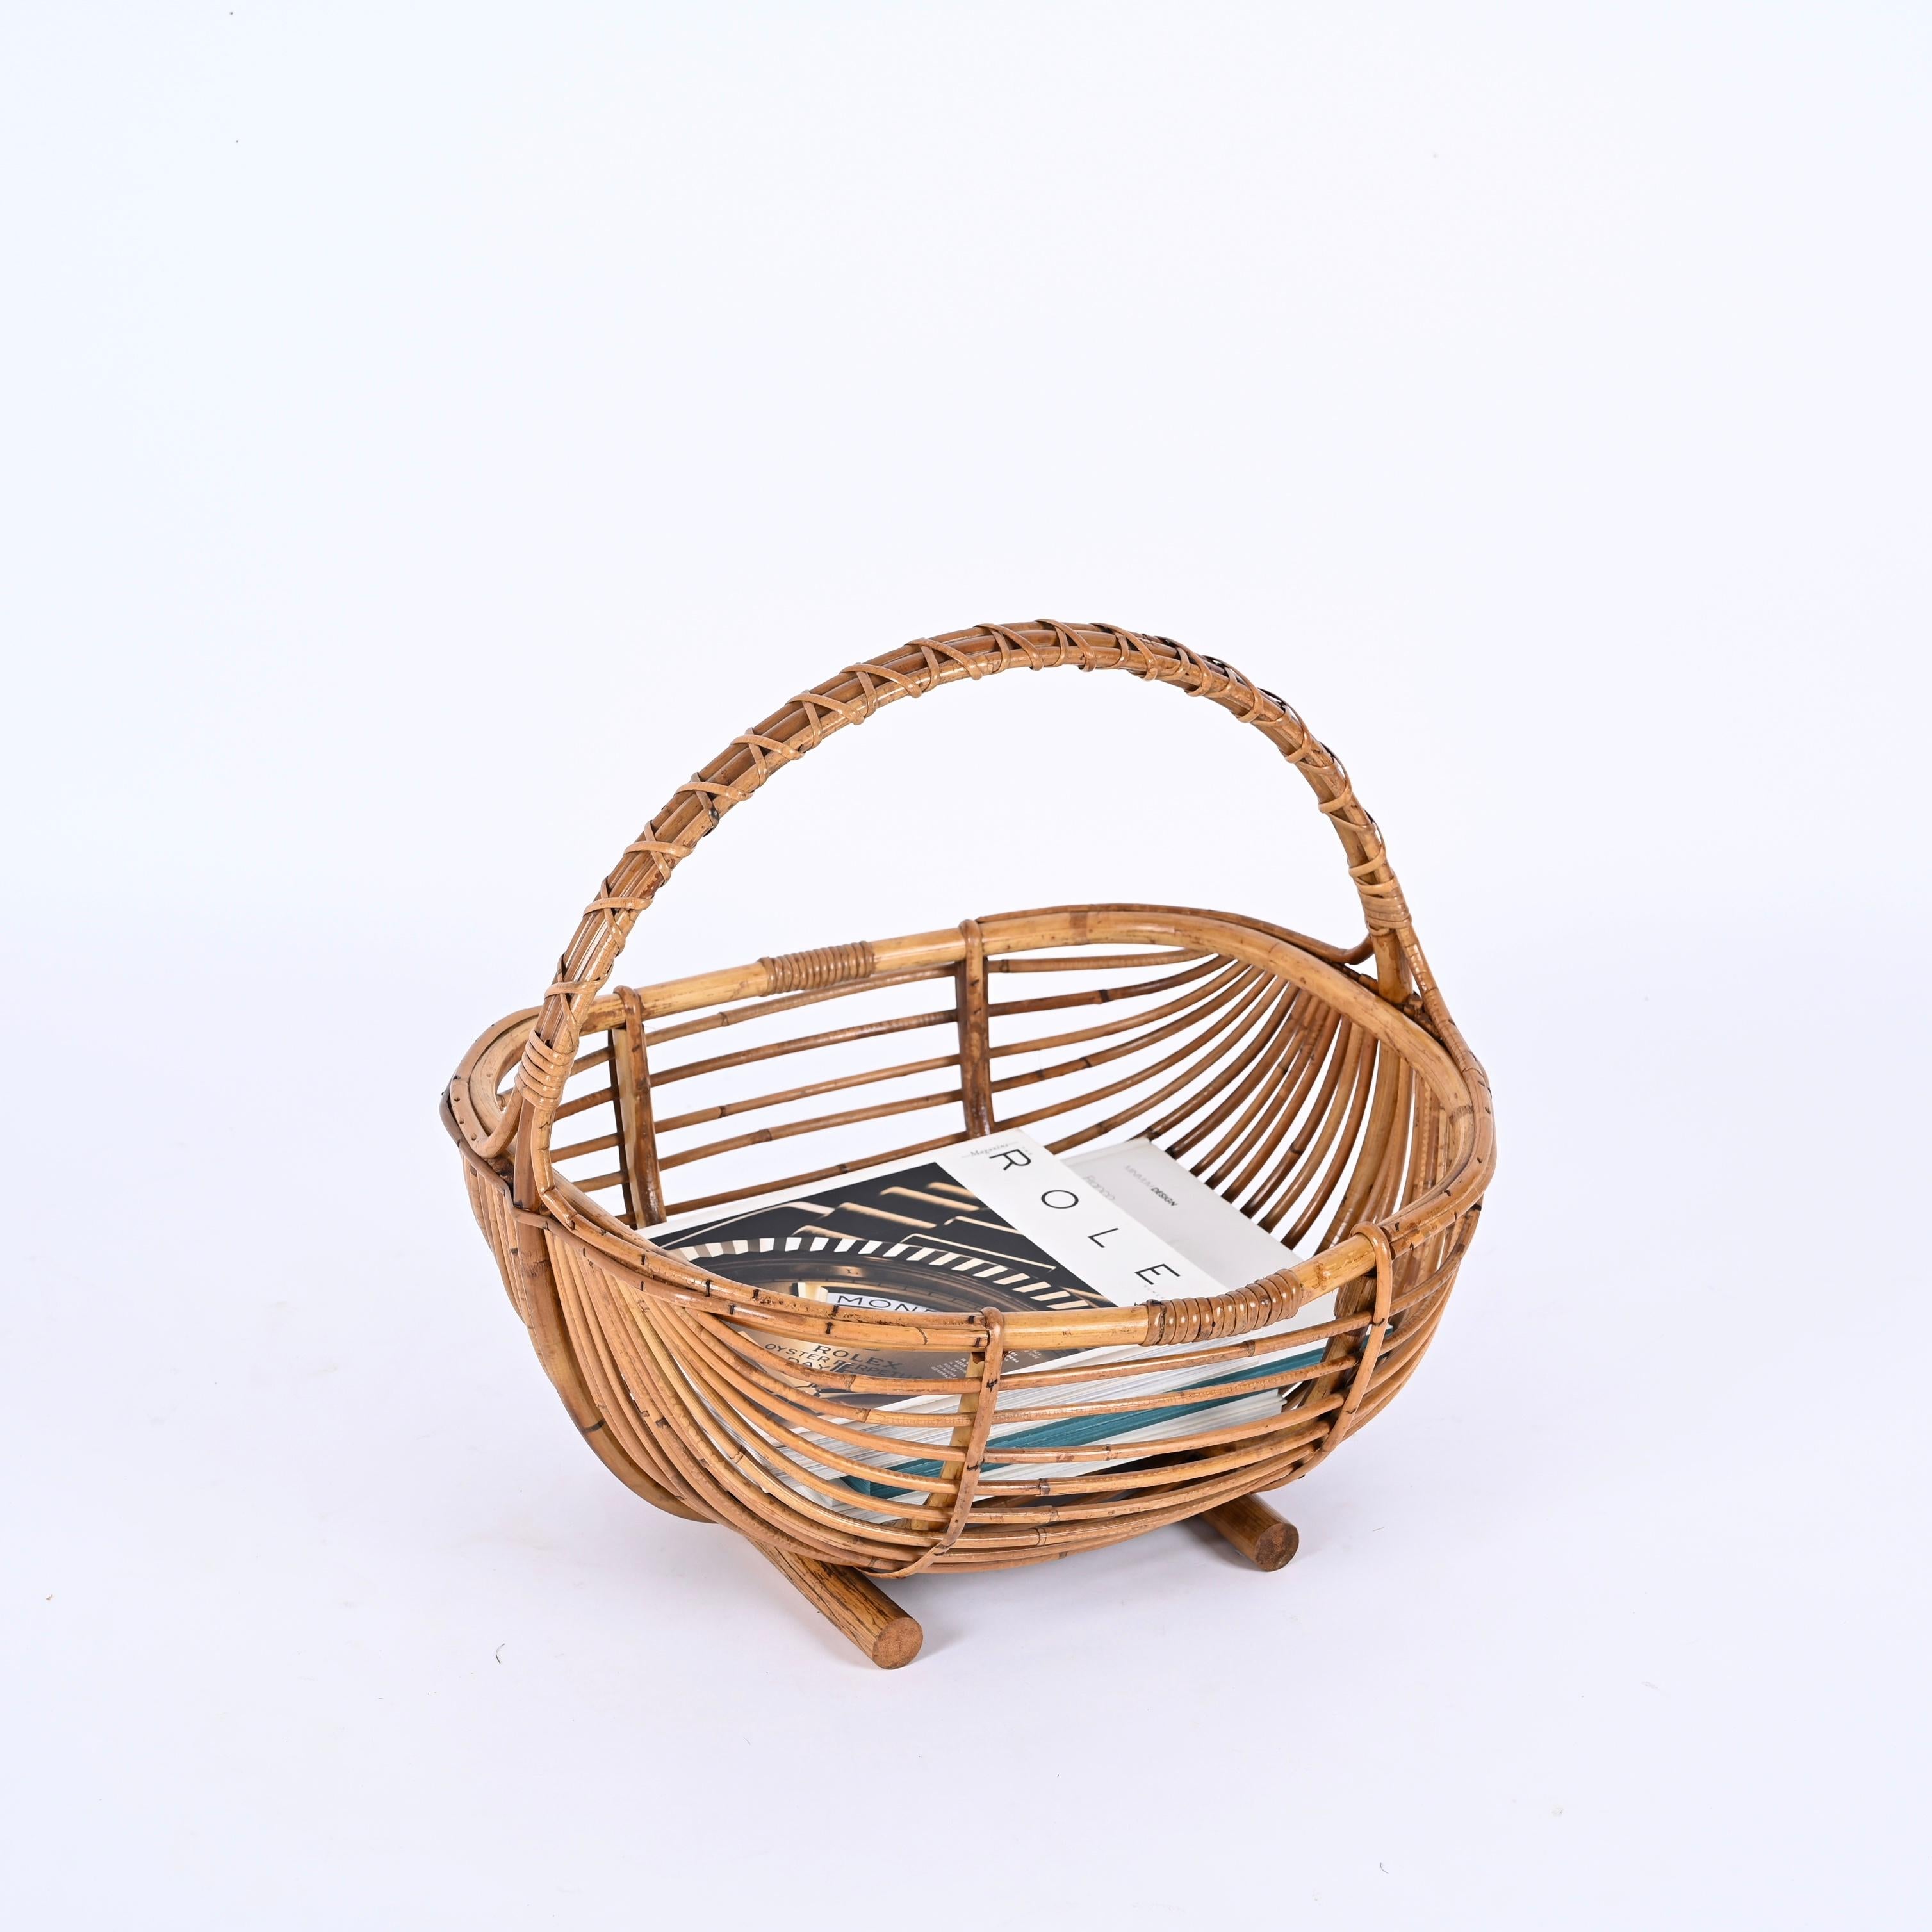 Midcentury French Riviera Magazine Rack in Bamboo and Rattan, Italy 1970s For Sale 4